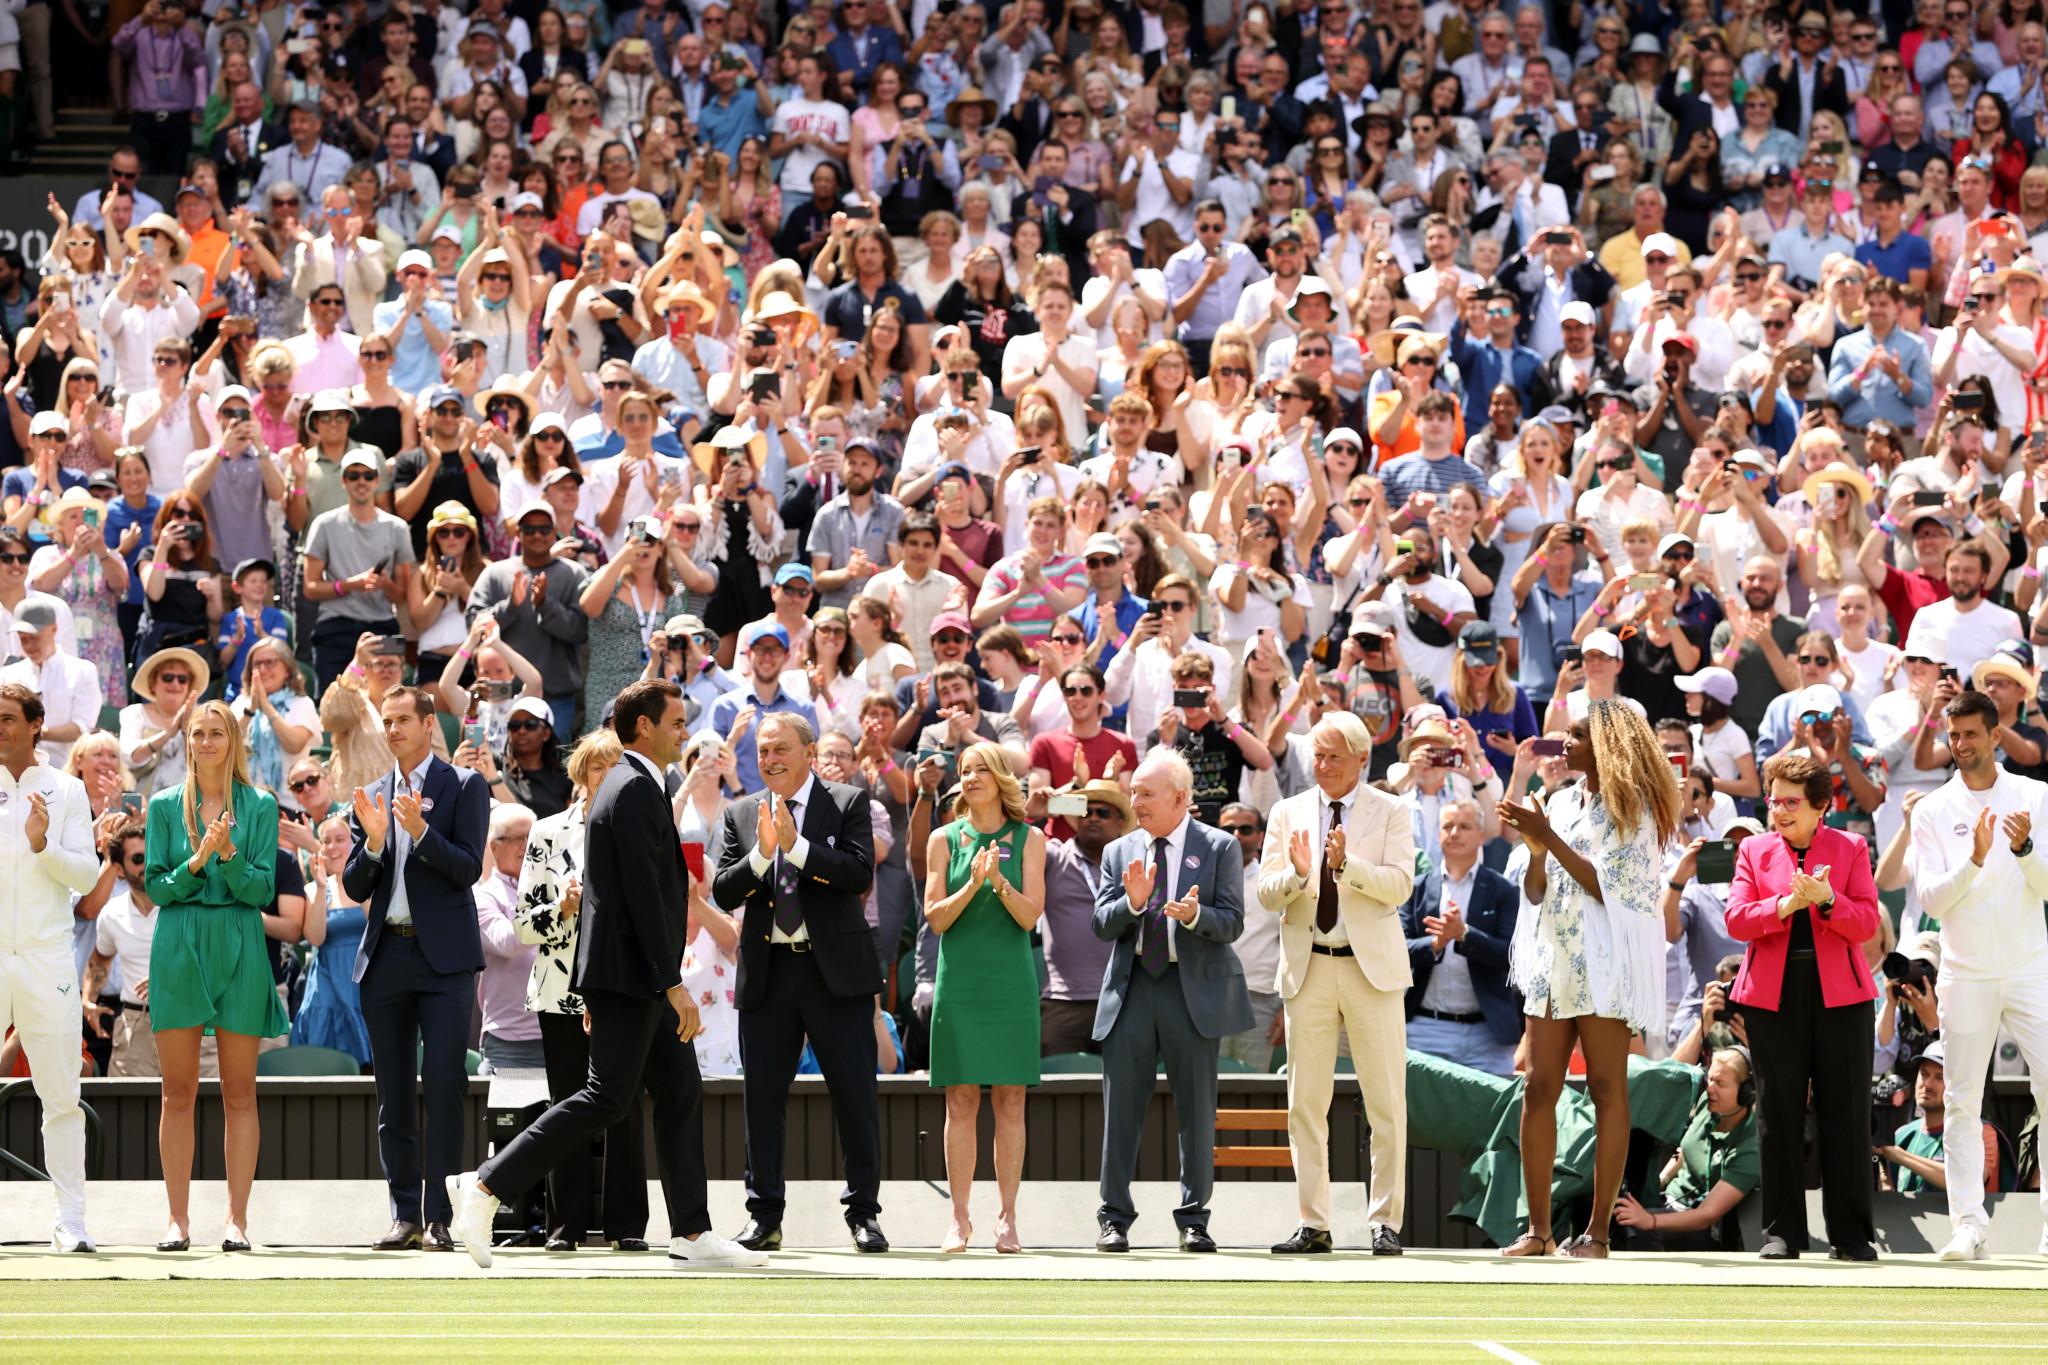 Wimbledon winners join together to celebrate centenary of Centre Court